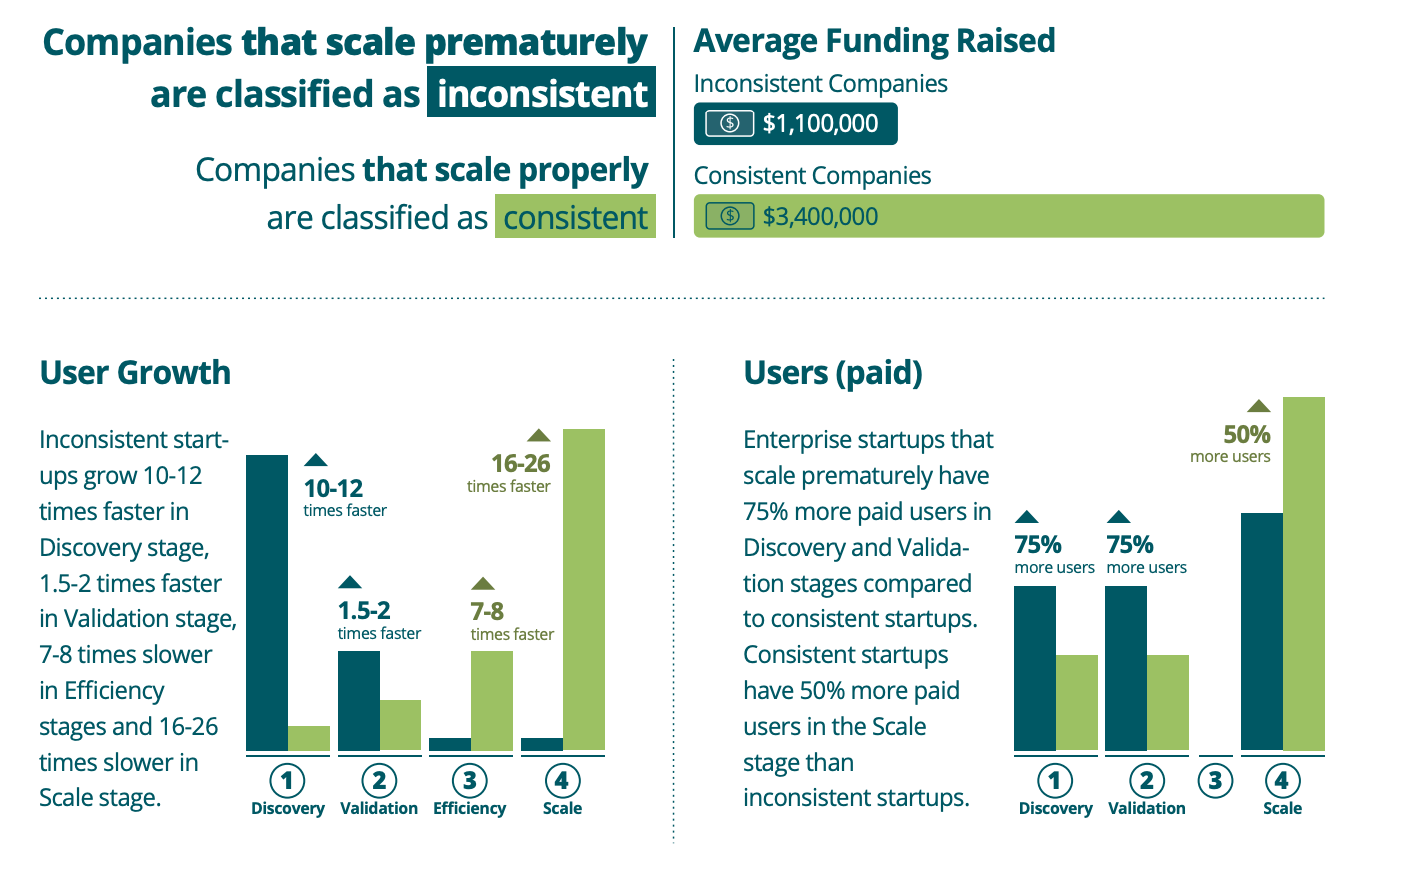 Startup Genome: signs that companies are scaling too quickly